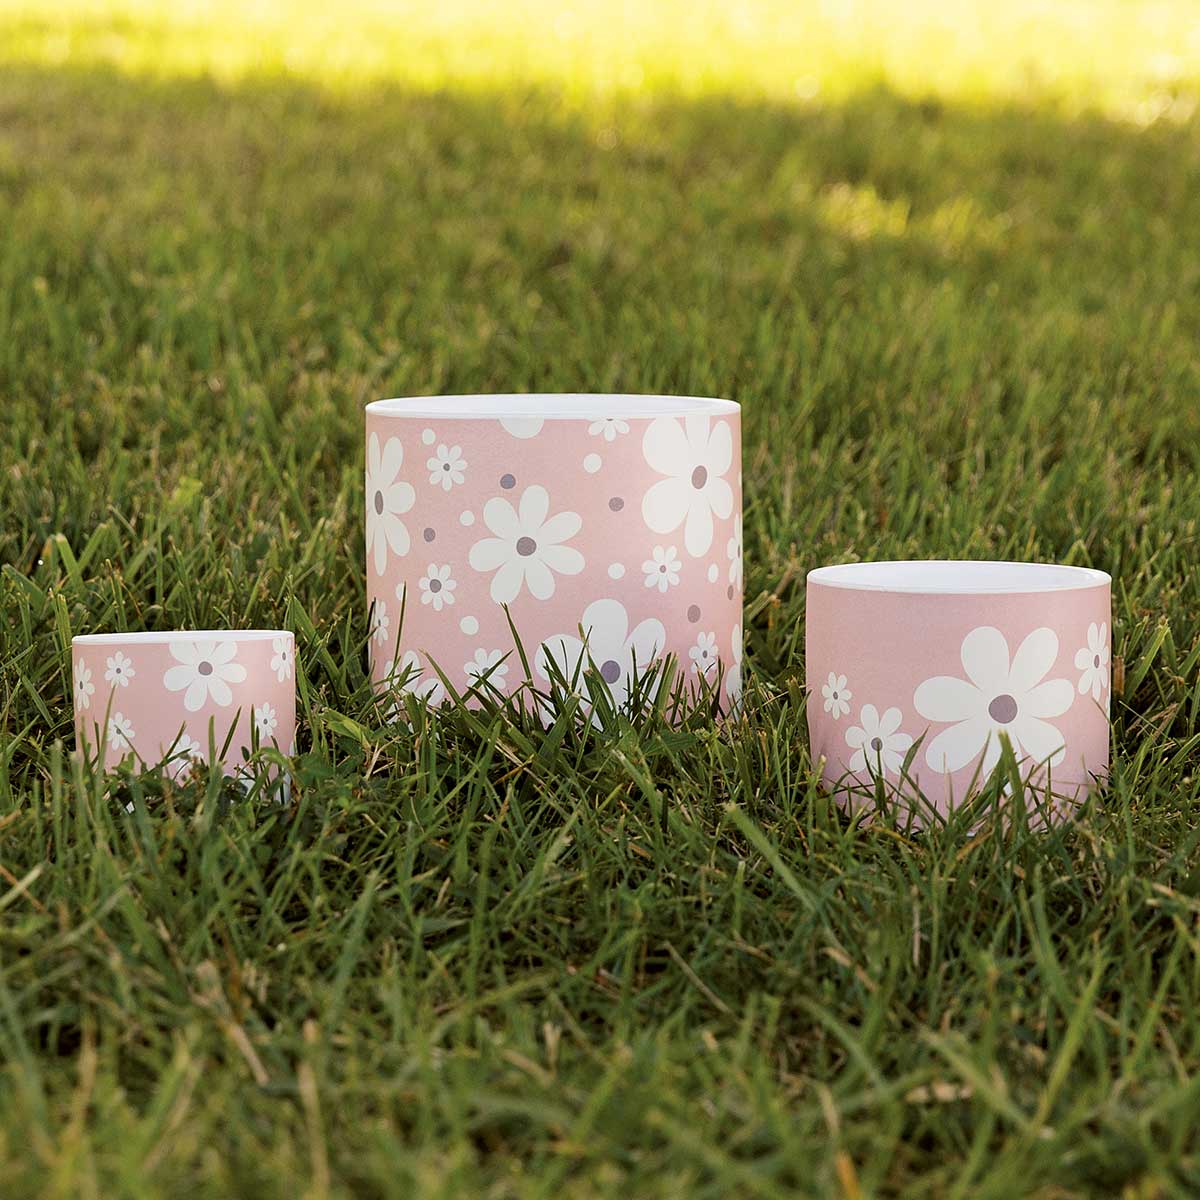 b50 POT WHOOPSIE DAISY MEDIUM 4IN X 3.25IN PINK/WHITE CERAMIC - Click Image to Close